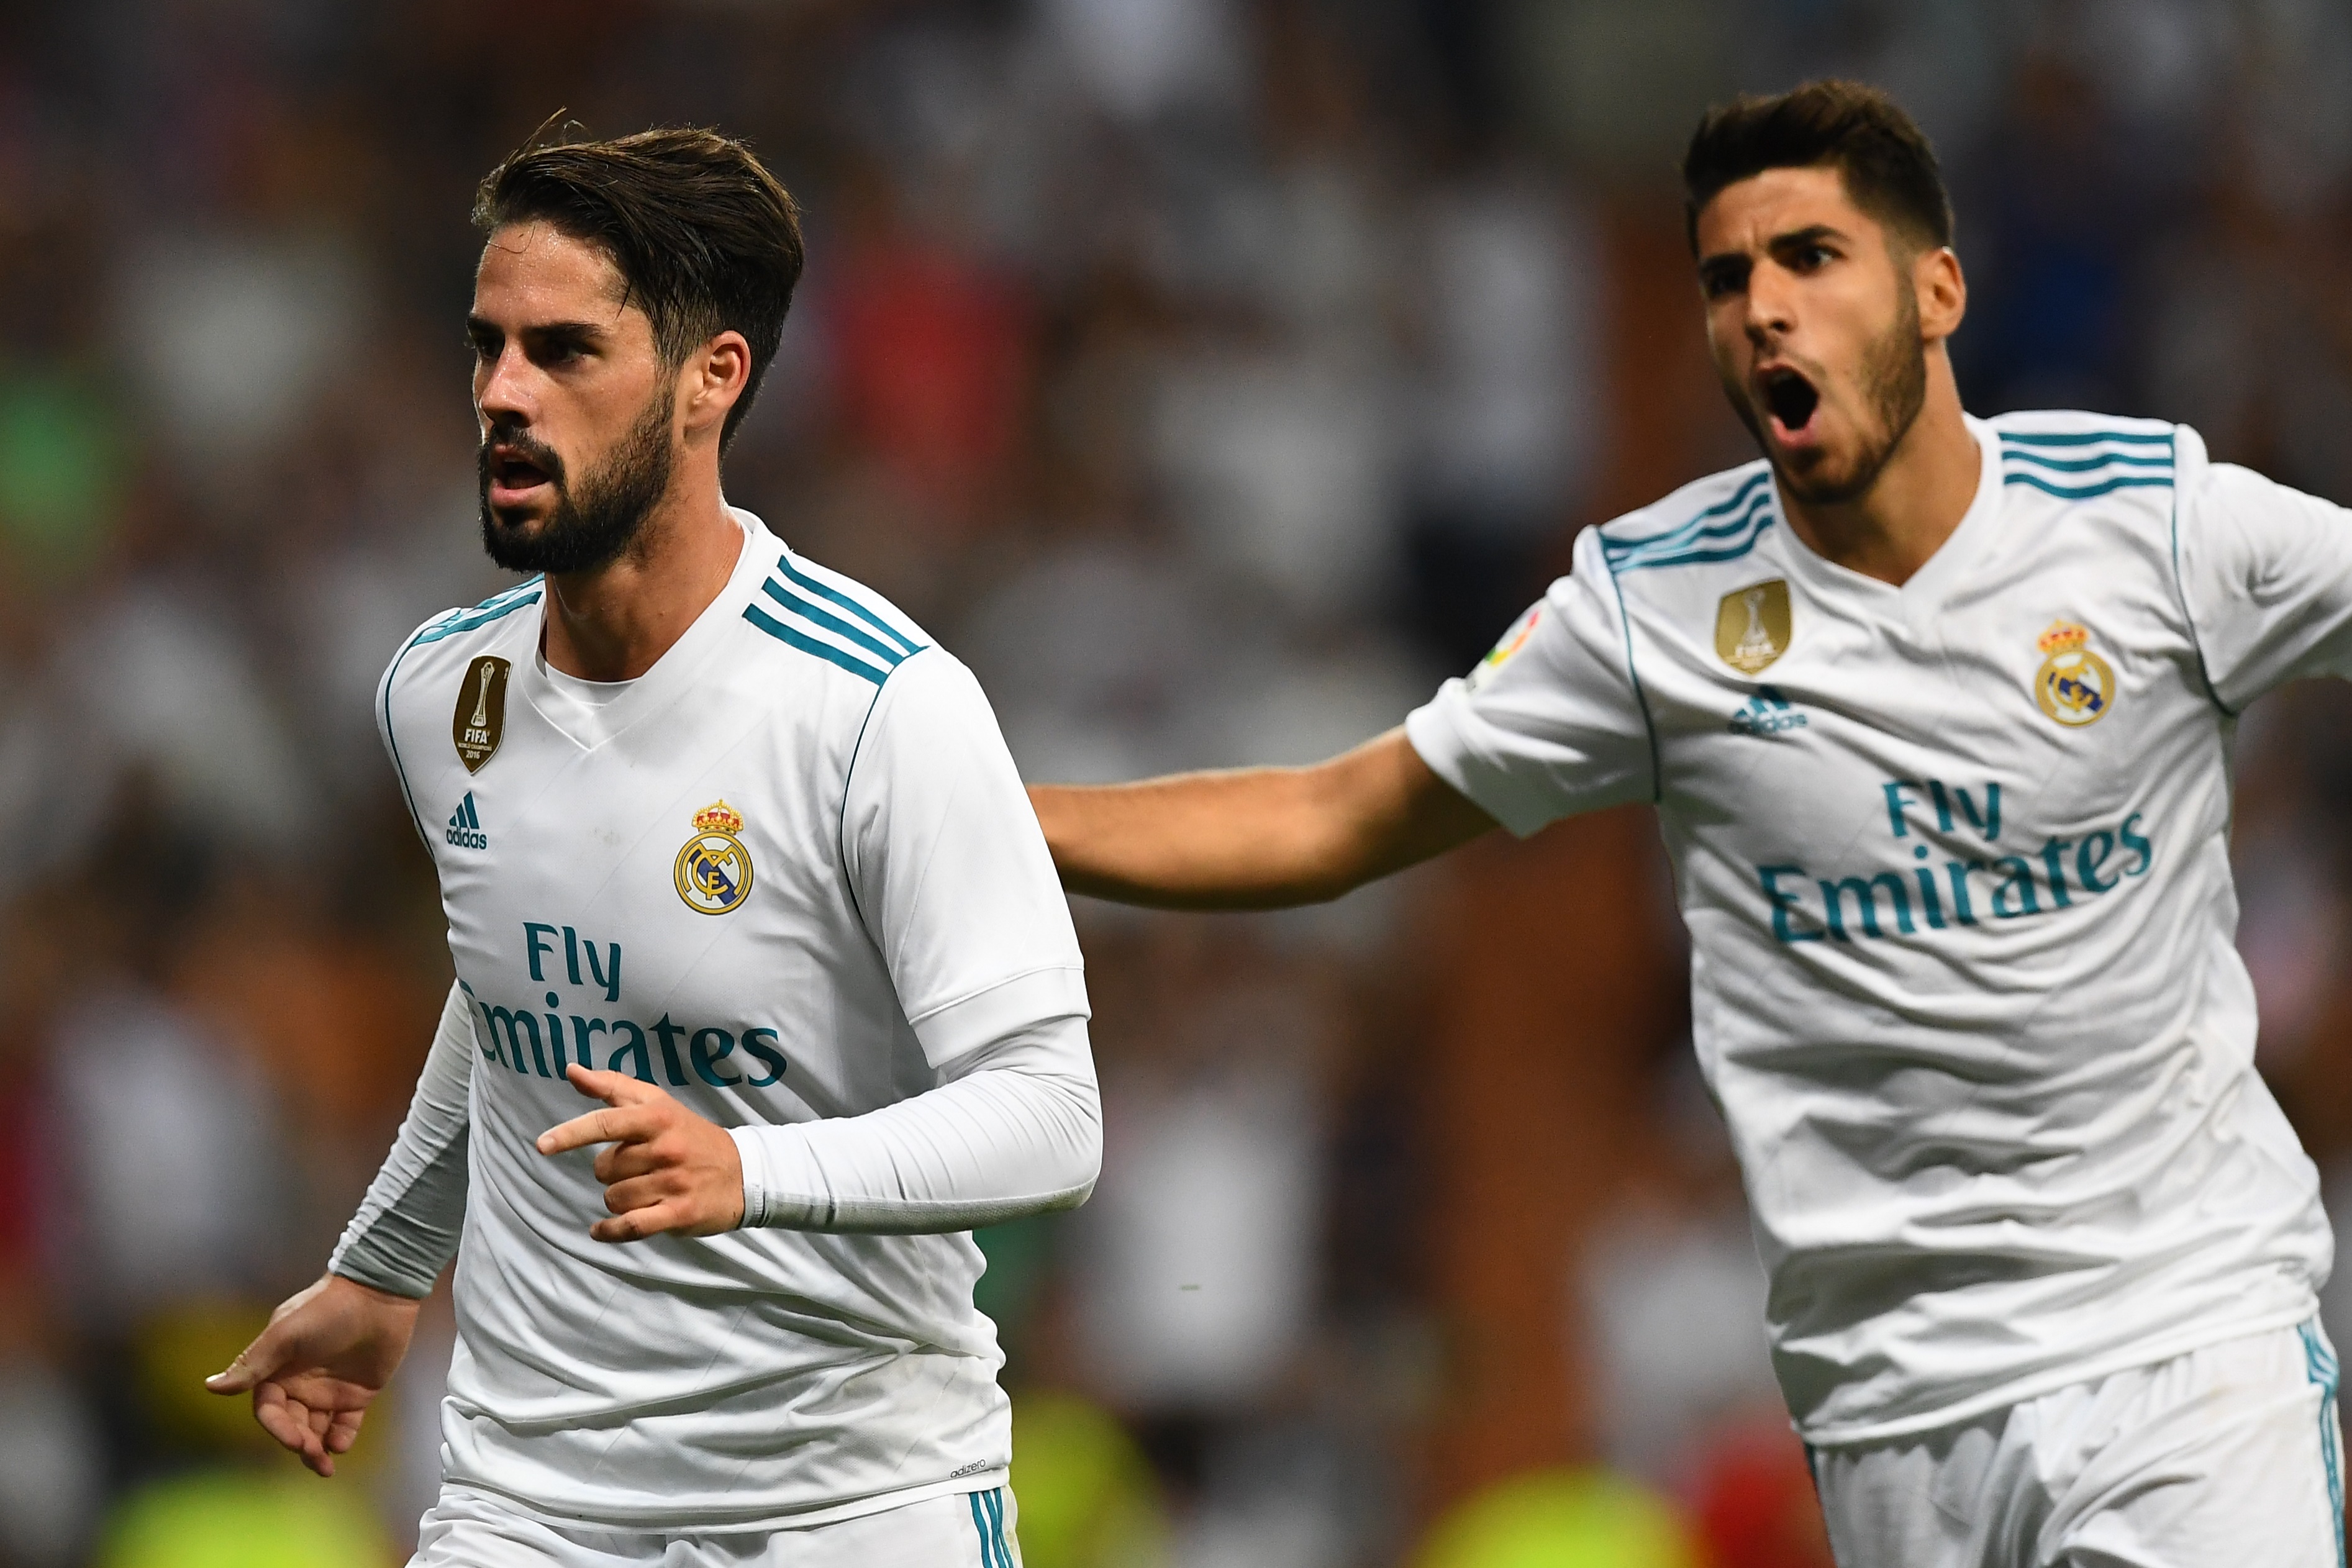 Real Madrid's midfielder Isco (L) celebrates his second goal during the Spanish league football match Real Madrid CF vs RCD Espanyol at the Santiago Bernabeu stadium in Madrid on October 1, 2017. / AFP PHOTO / GABRIEL BOUYS        (Photo credit should read GABRIEL BOUYS/AFP/Getty Images)